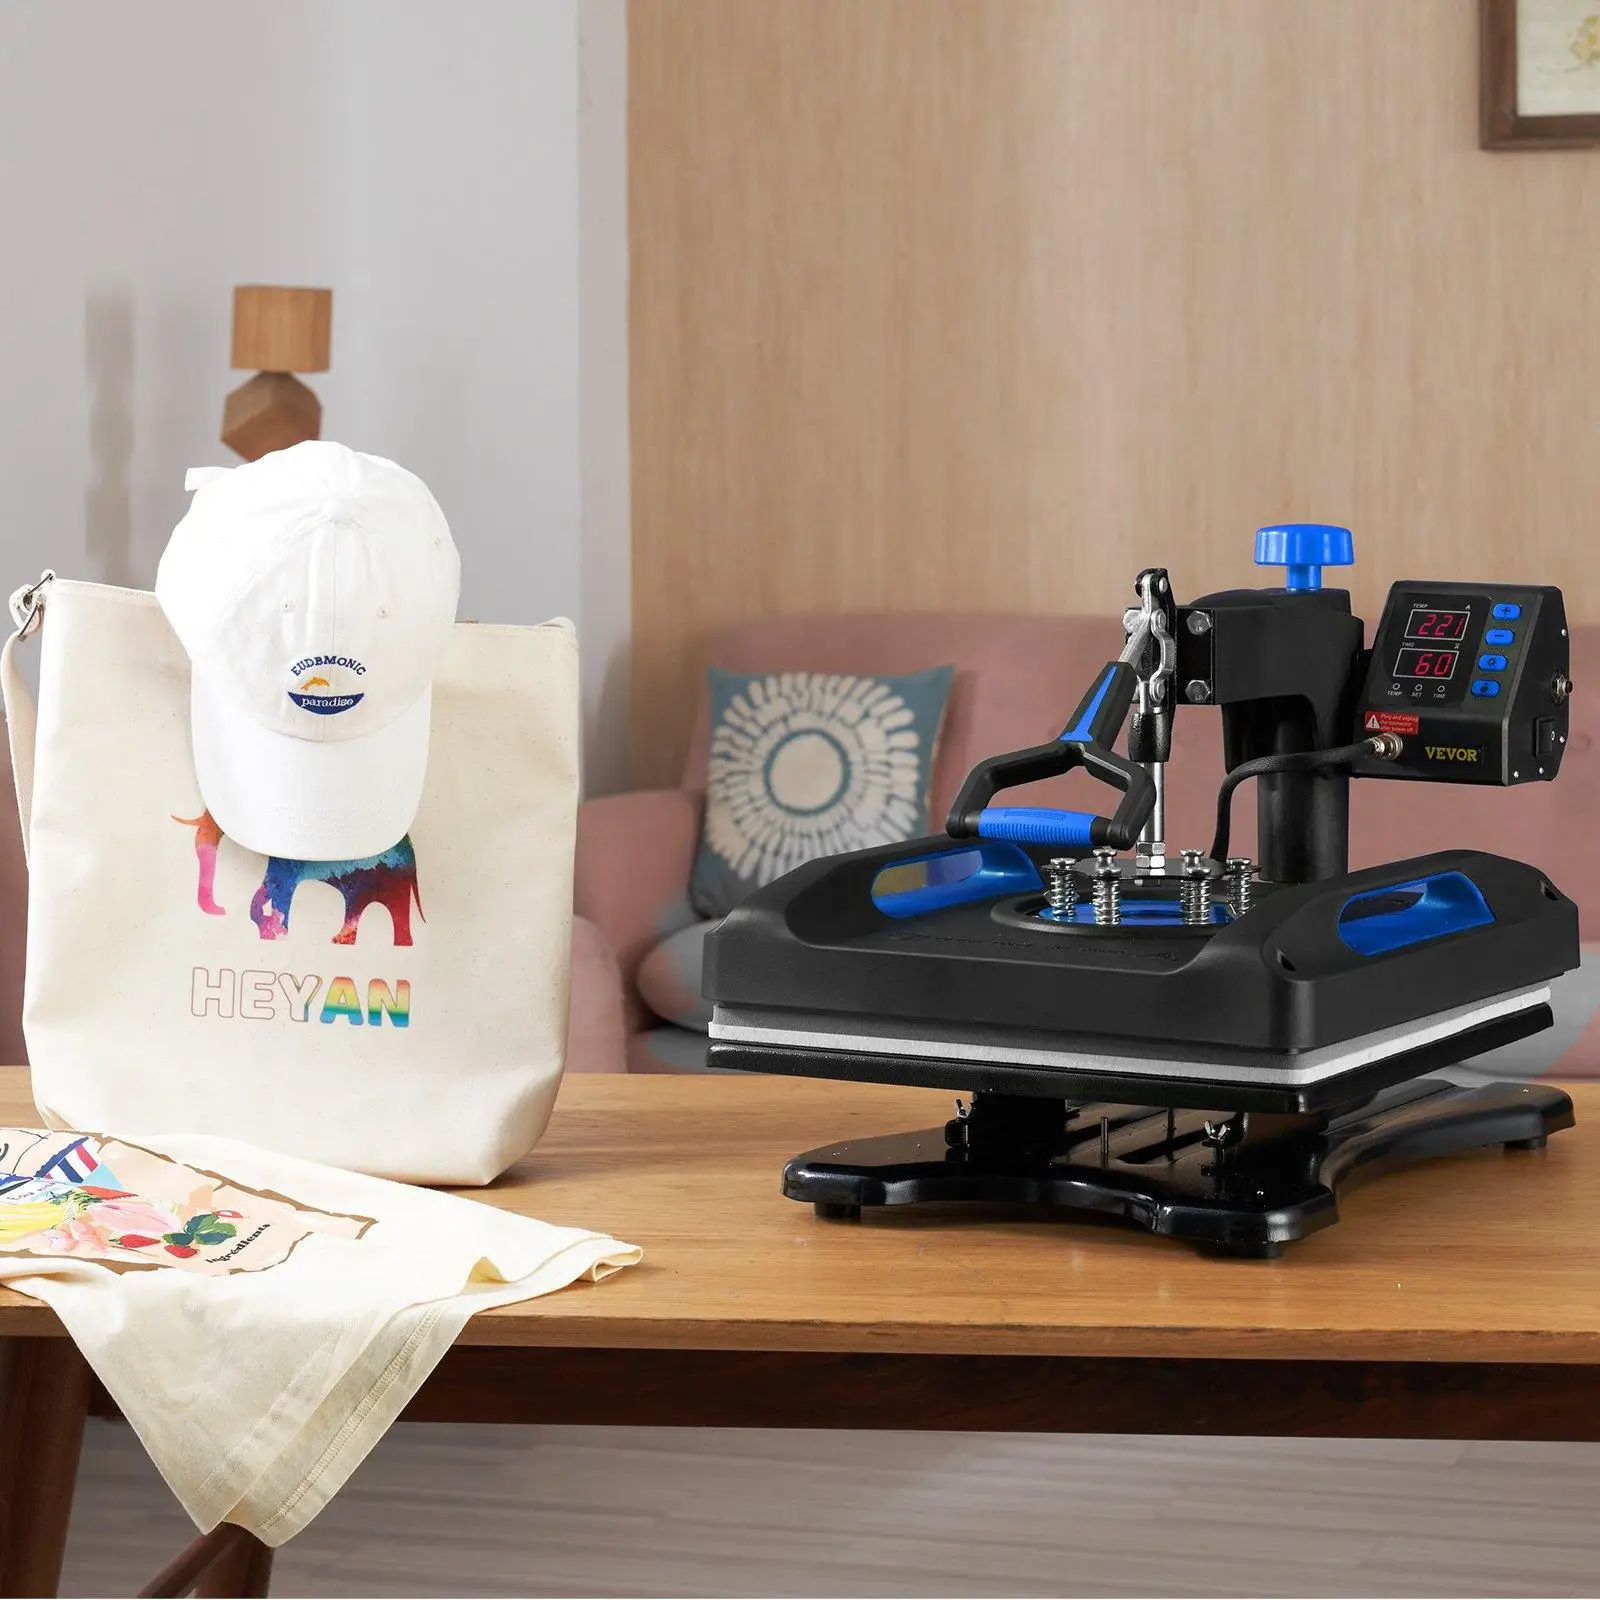 T-shirt Heat Press Machine: How to Choose and How to Use it? - VEVOR Blog